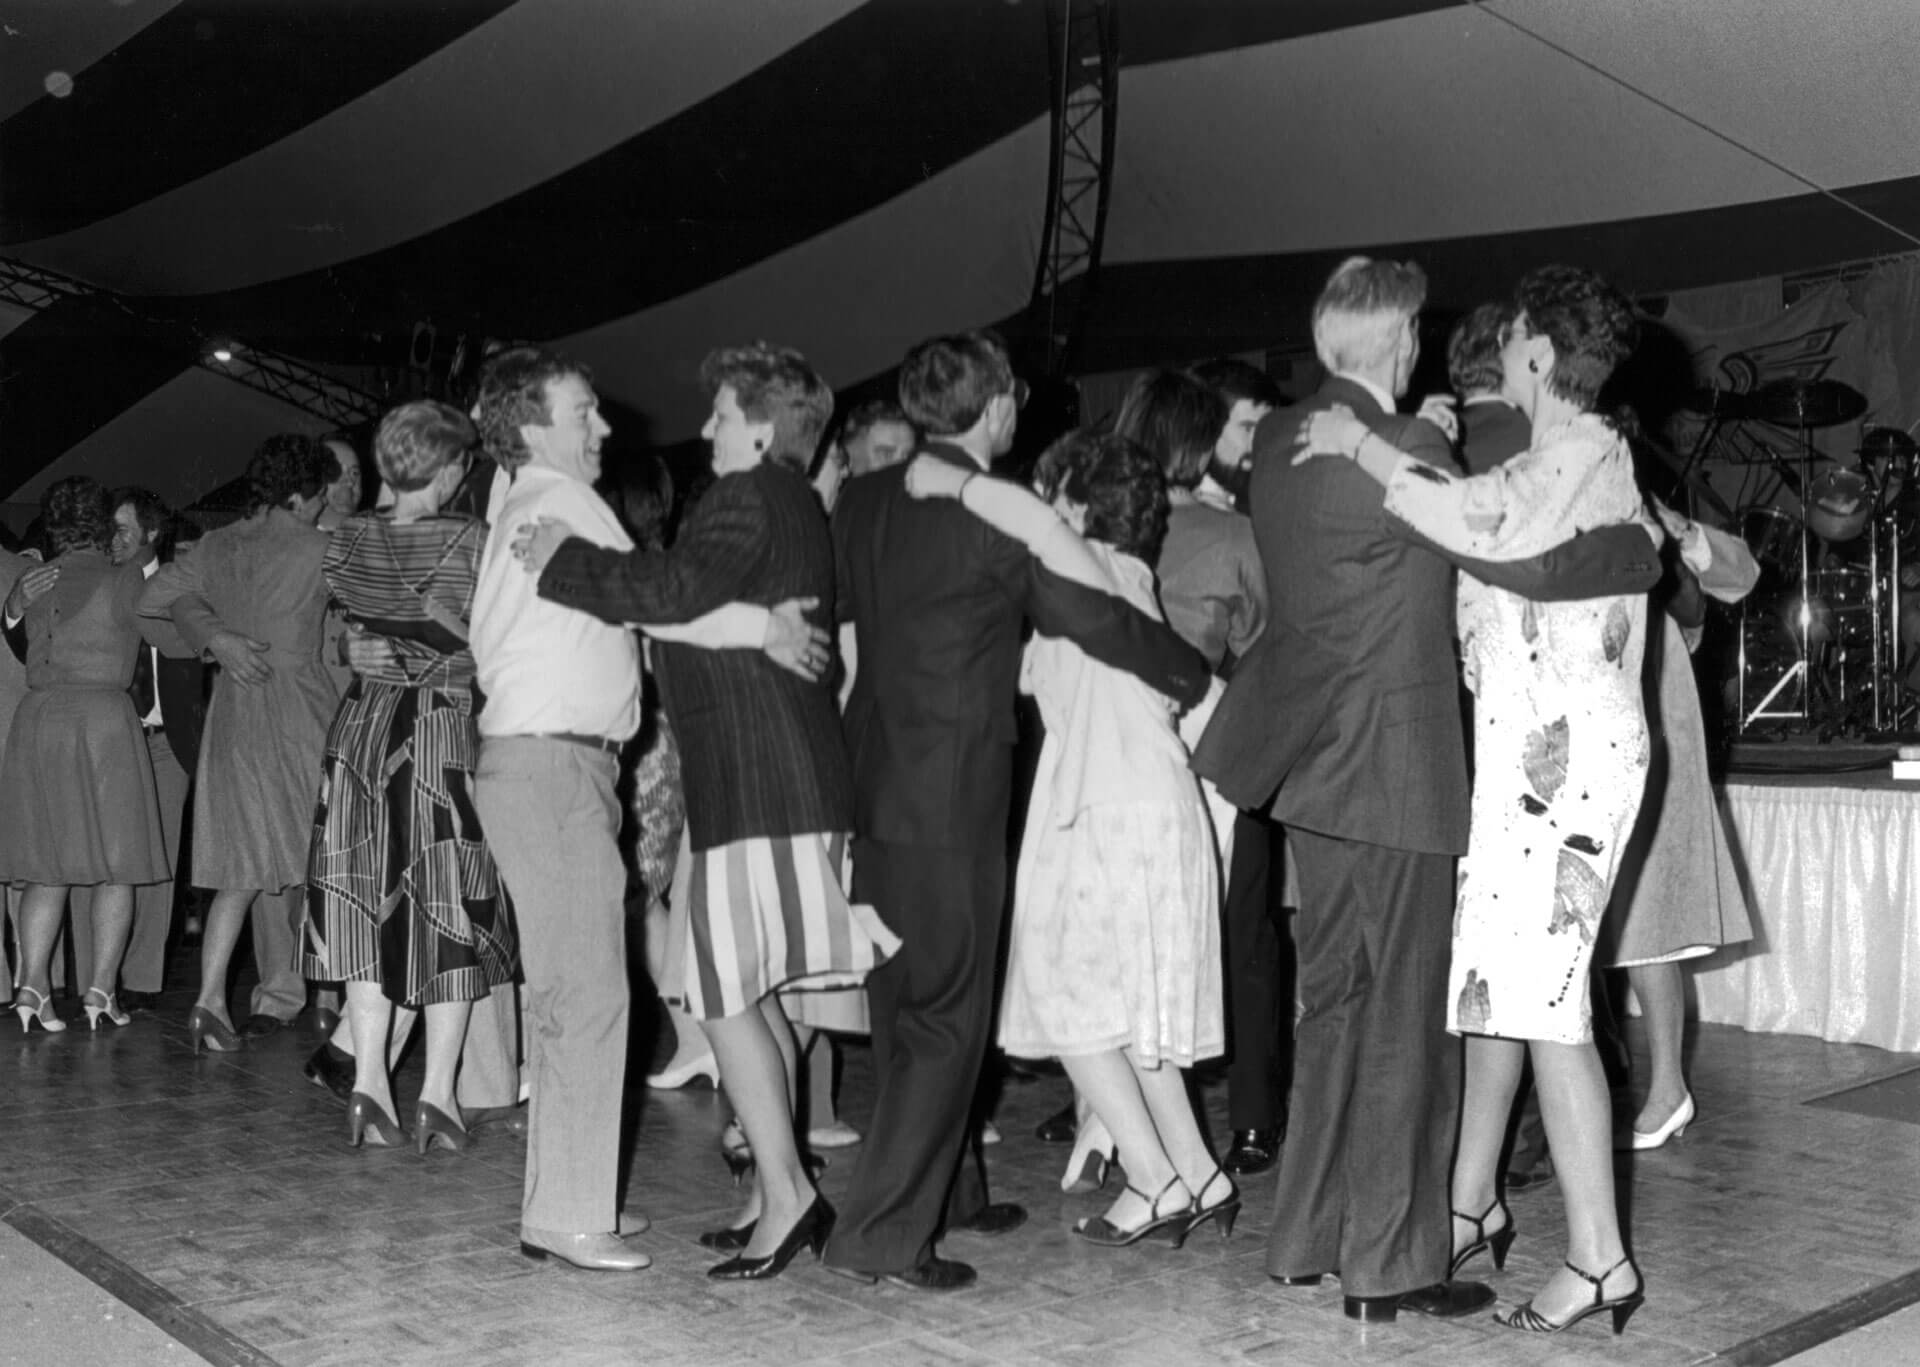 People dancing at a convocation ceremony in the 80s